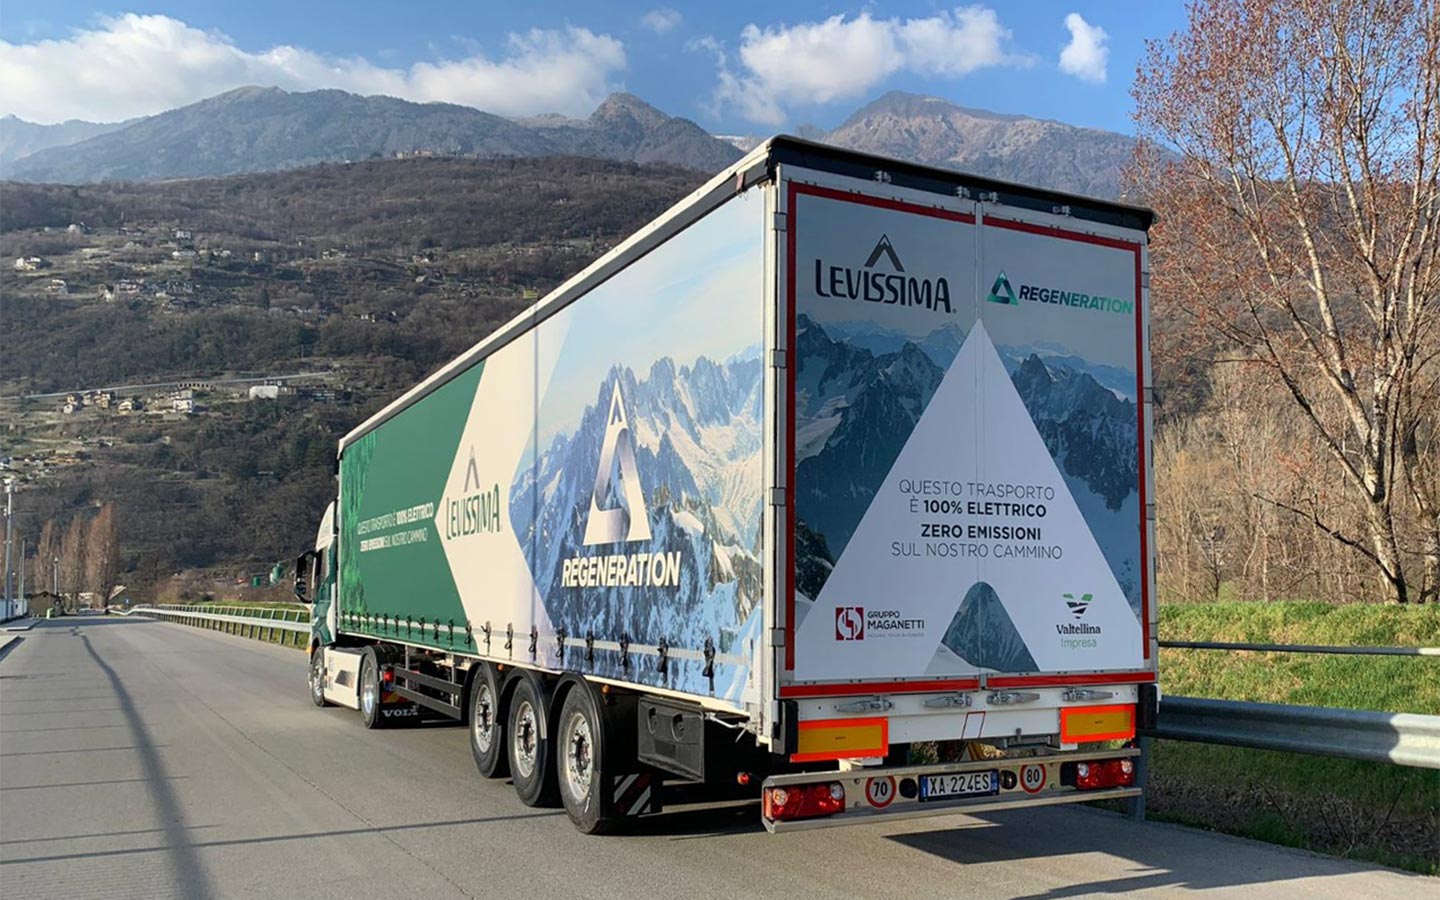 Levissima's 100% electric truck, made by ATC, has begun its journey from alpine peaks to italian supermarkets.